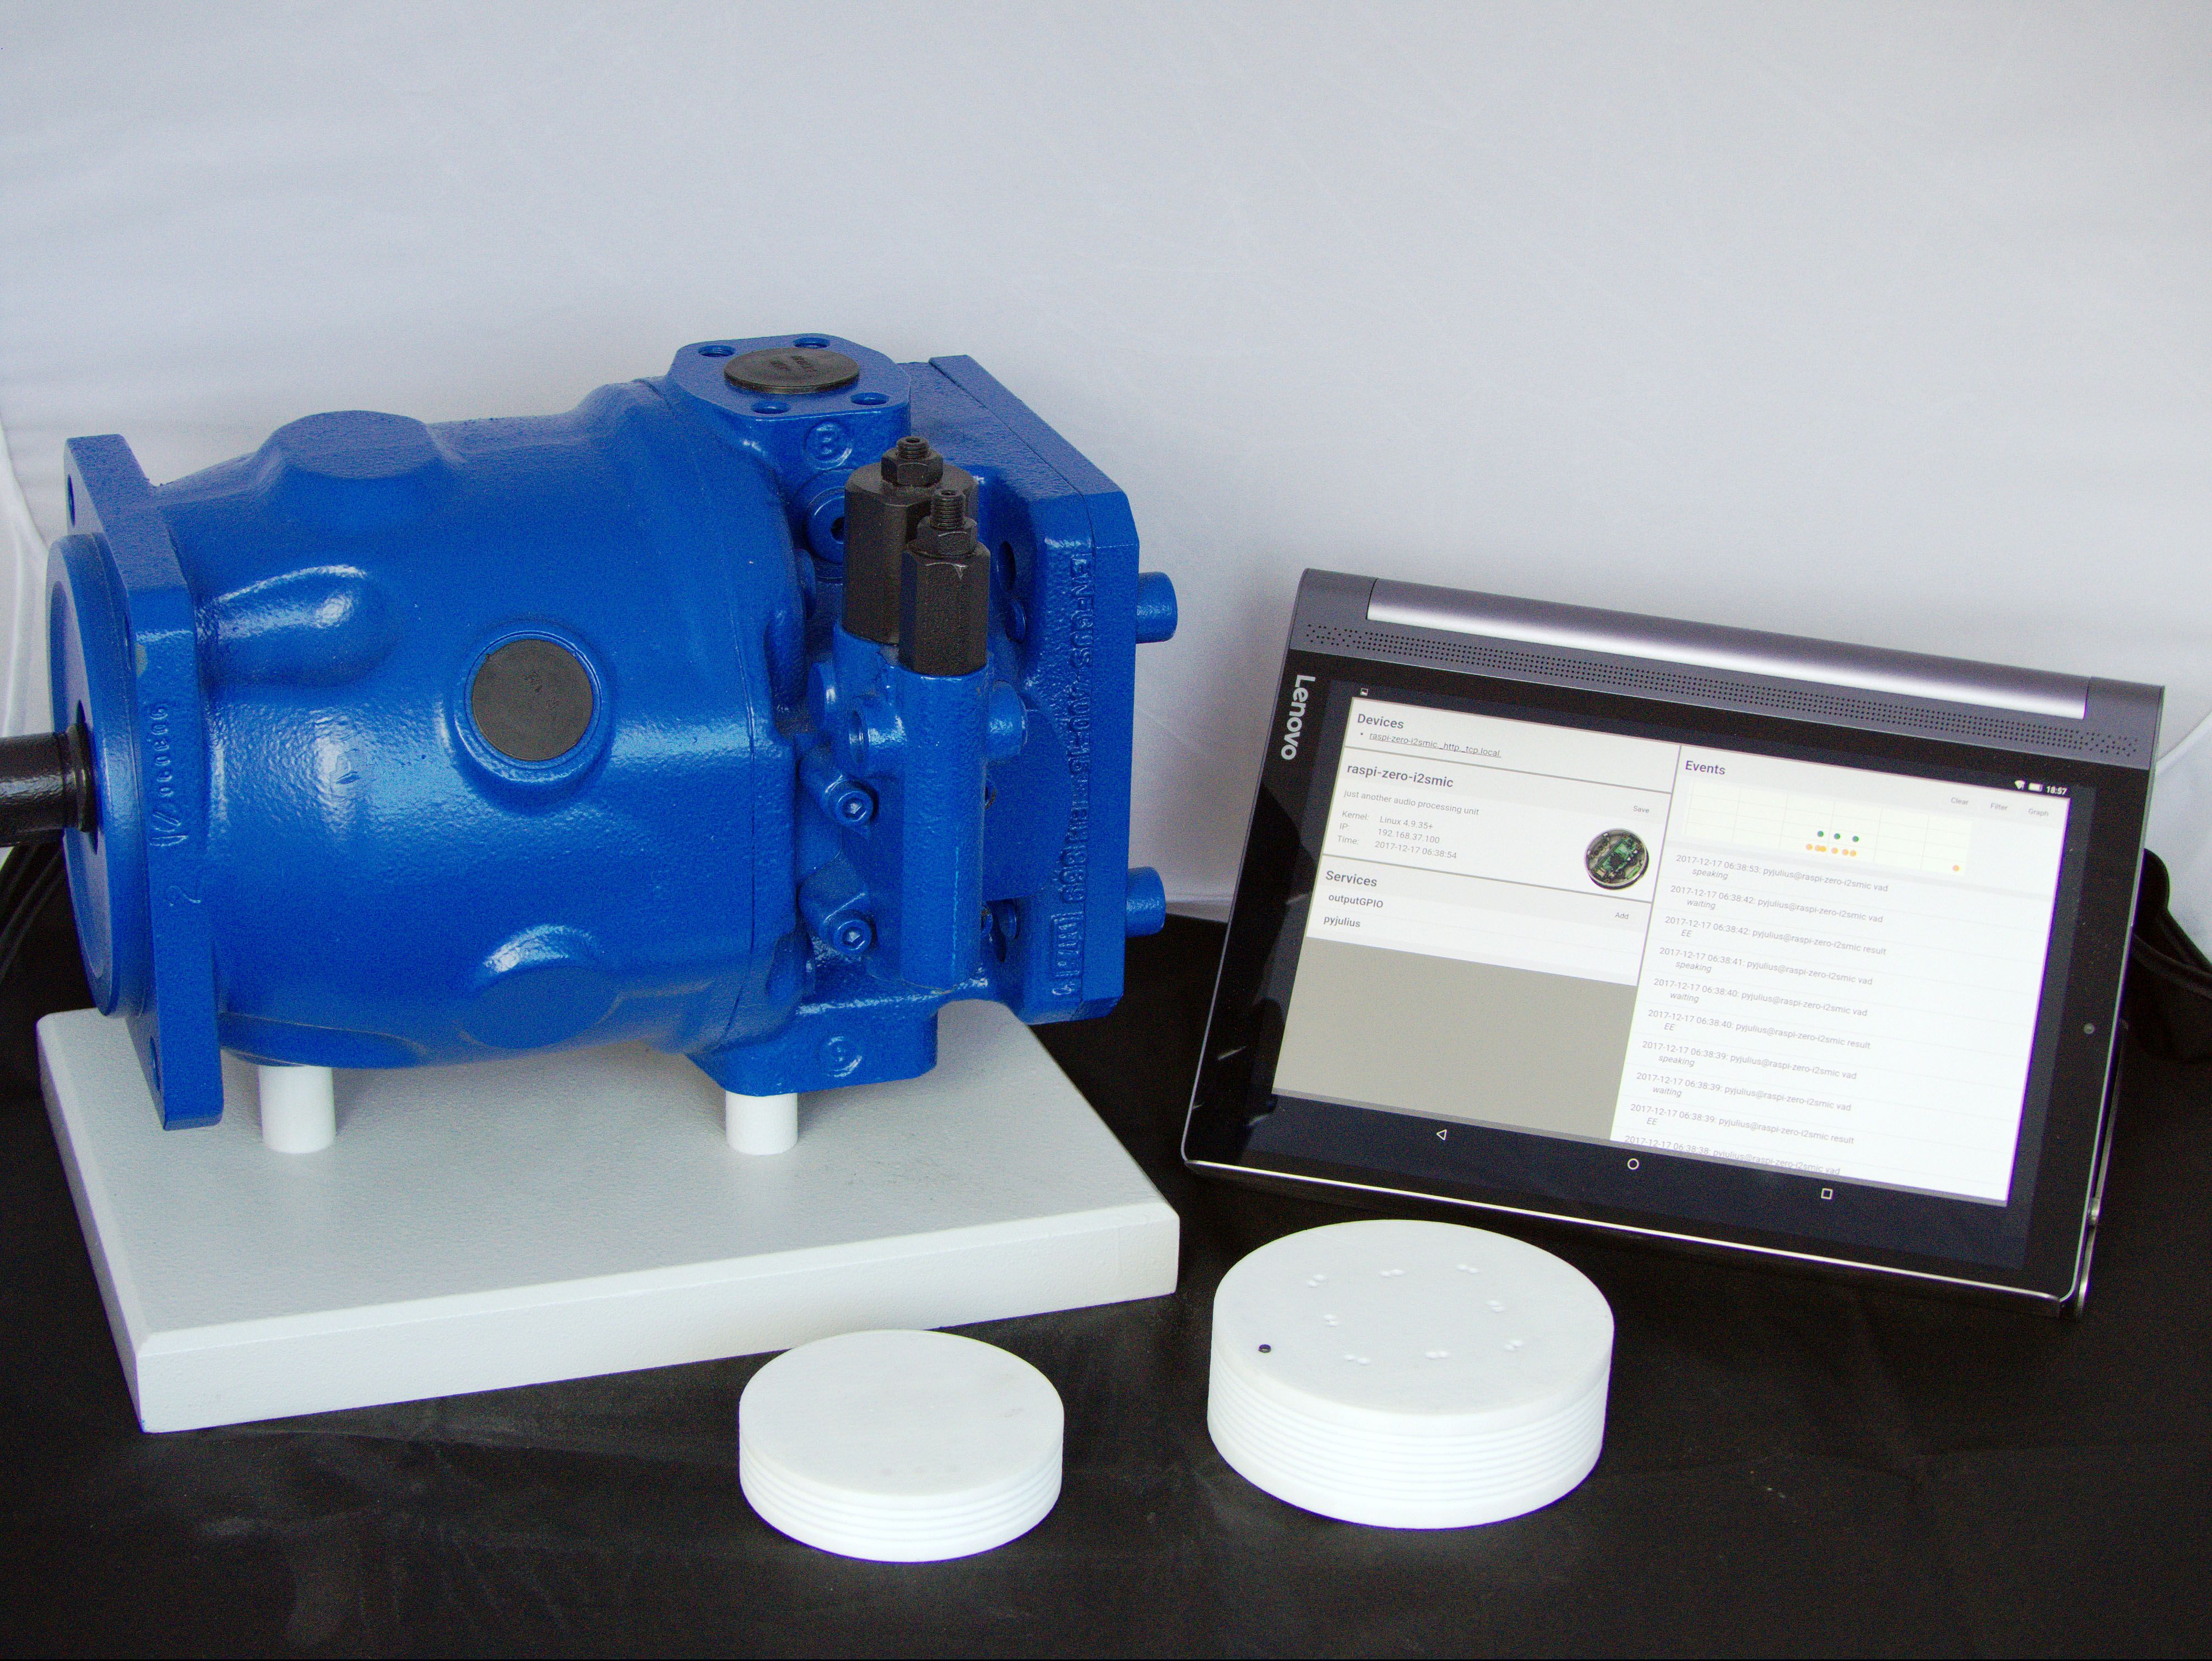 Demonstrator Hanover Messe 2018: configured wireless sensor nodes (in the foreground) send status messages of the axial piston pump (left) to a tablet.